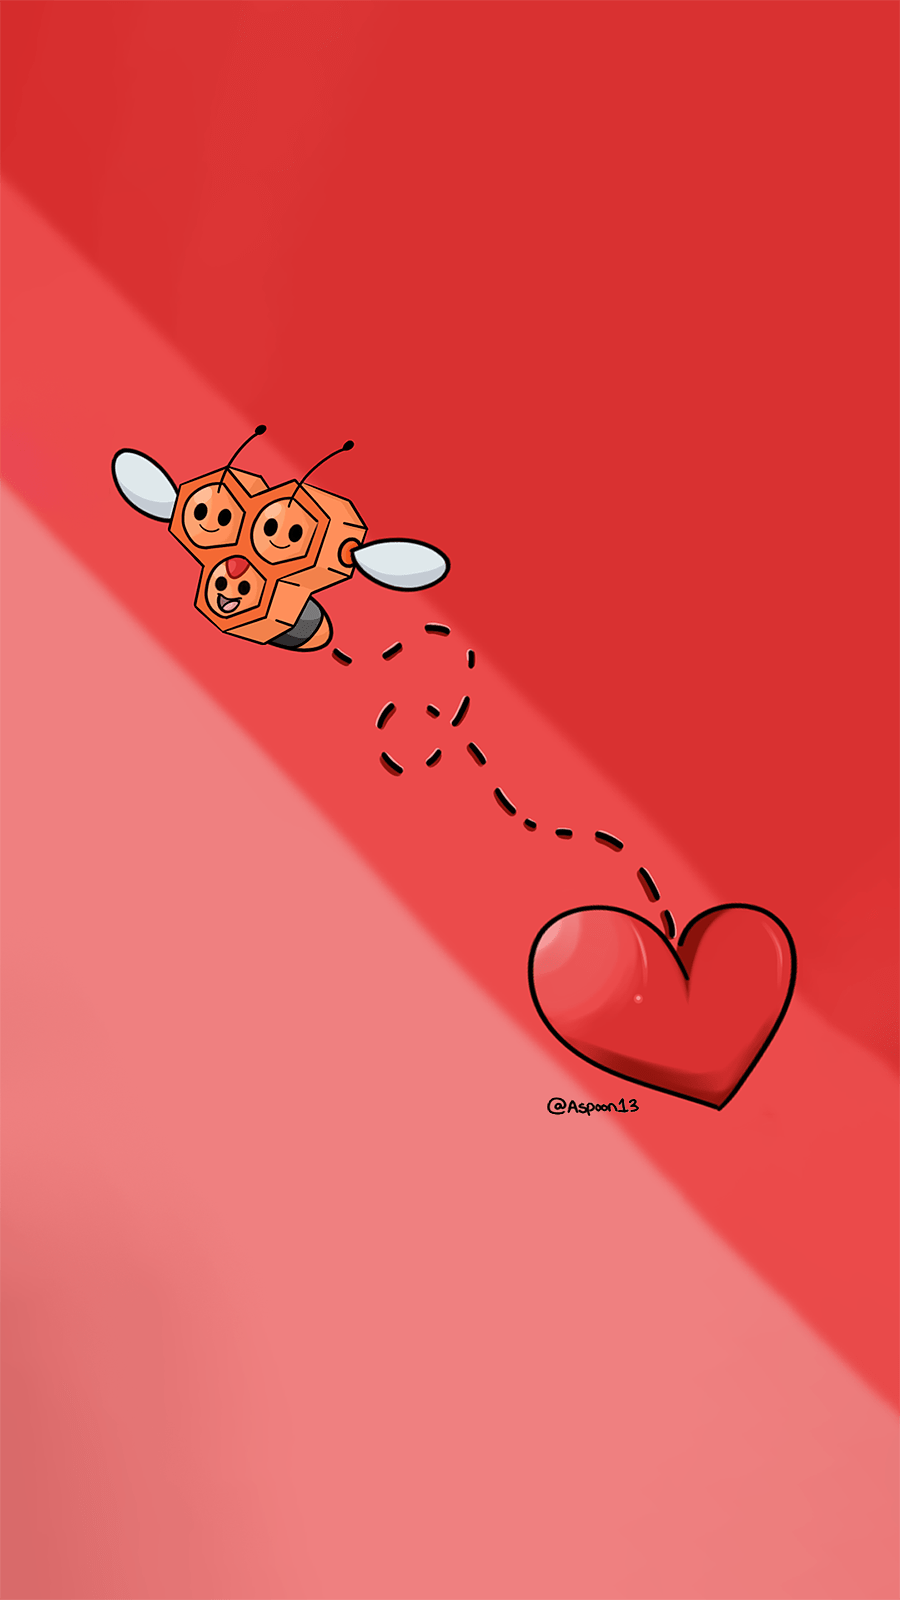 A cartoon of two bees and one heart - Valentine's Day, Pokemon, BT21